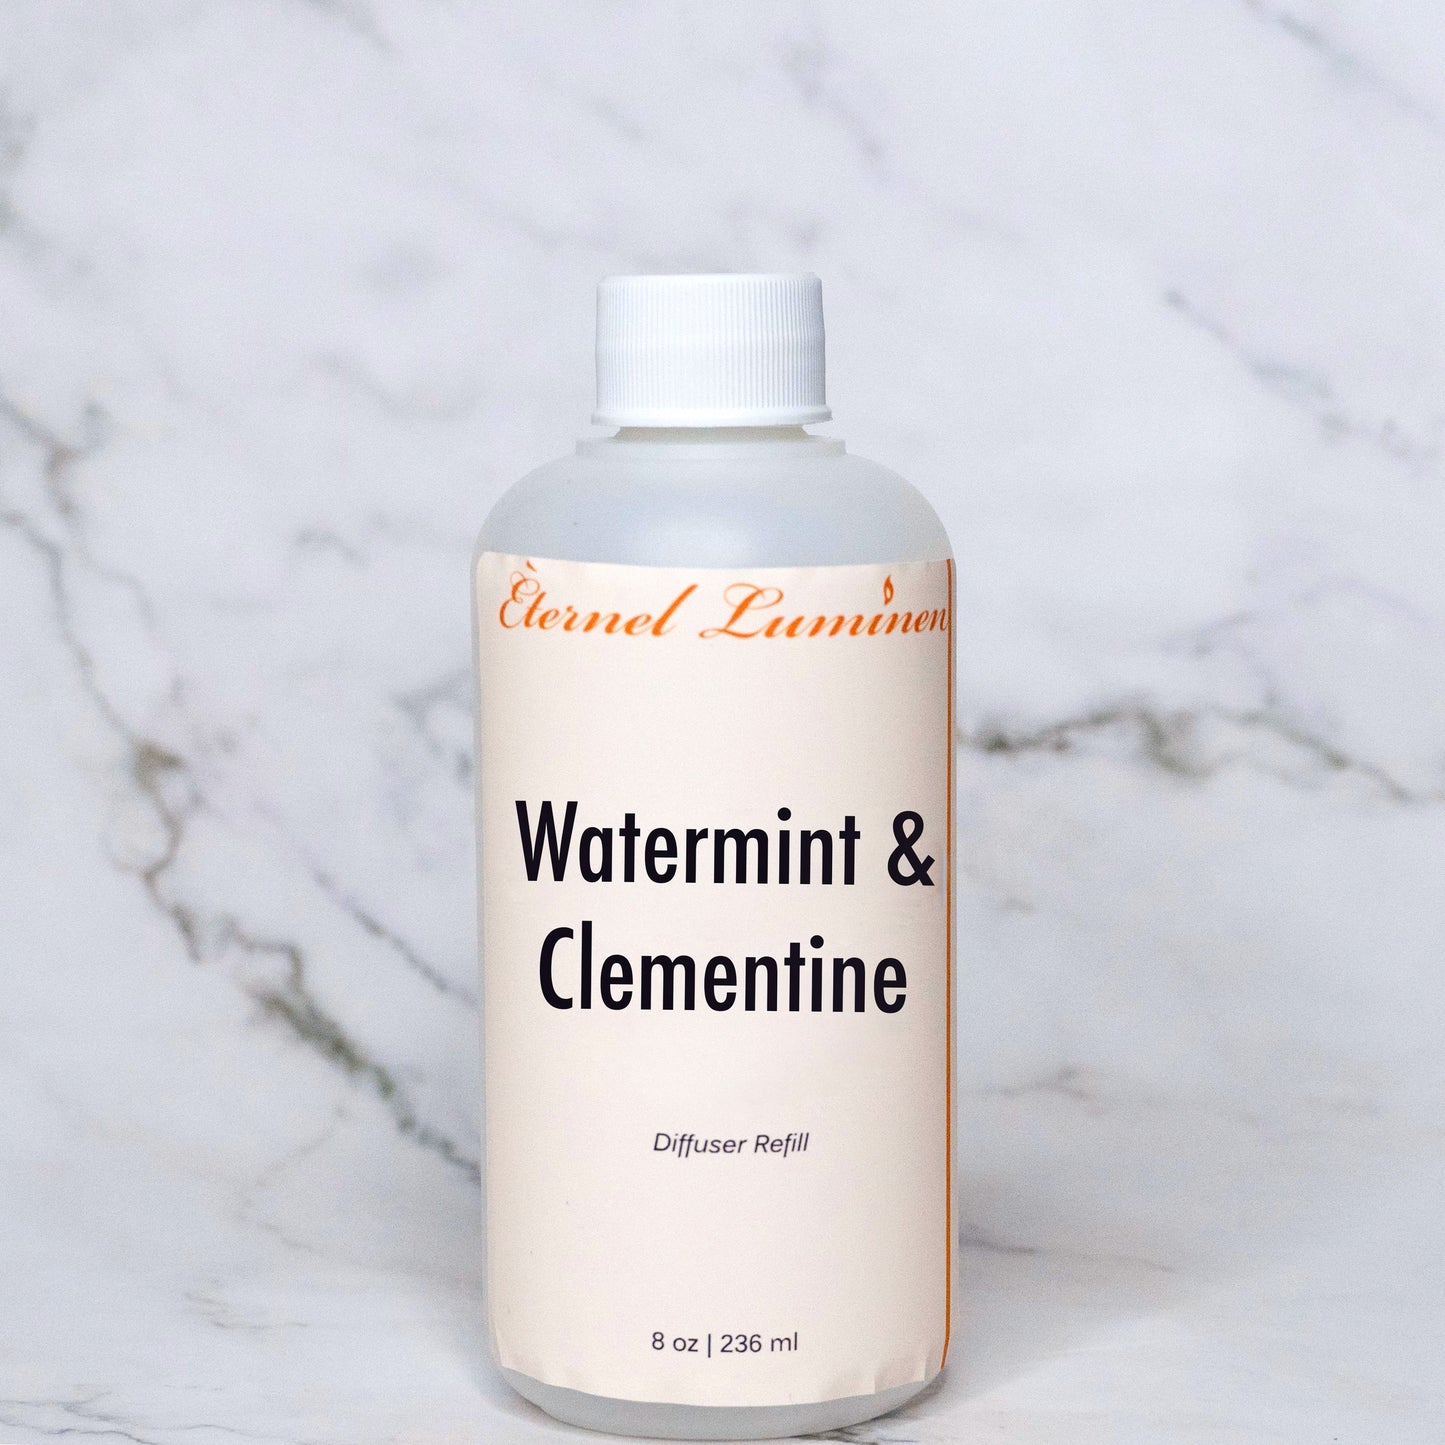 Watermint and Clementine Reed Diffuser Refill